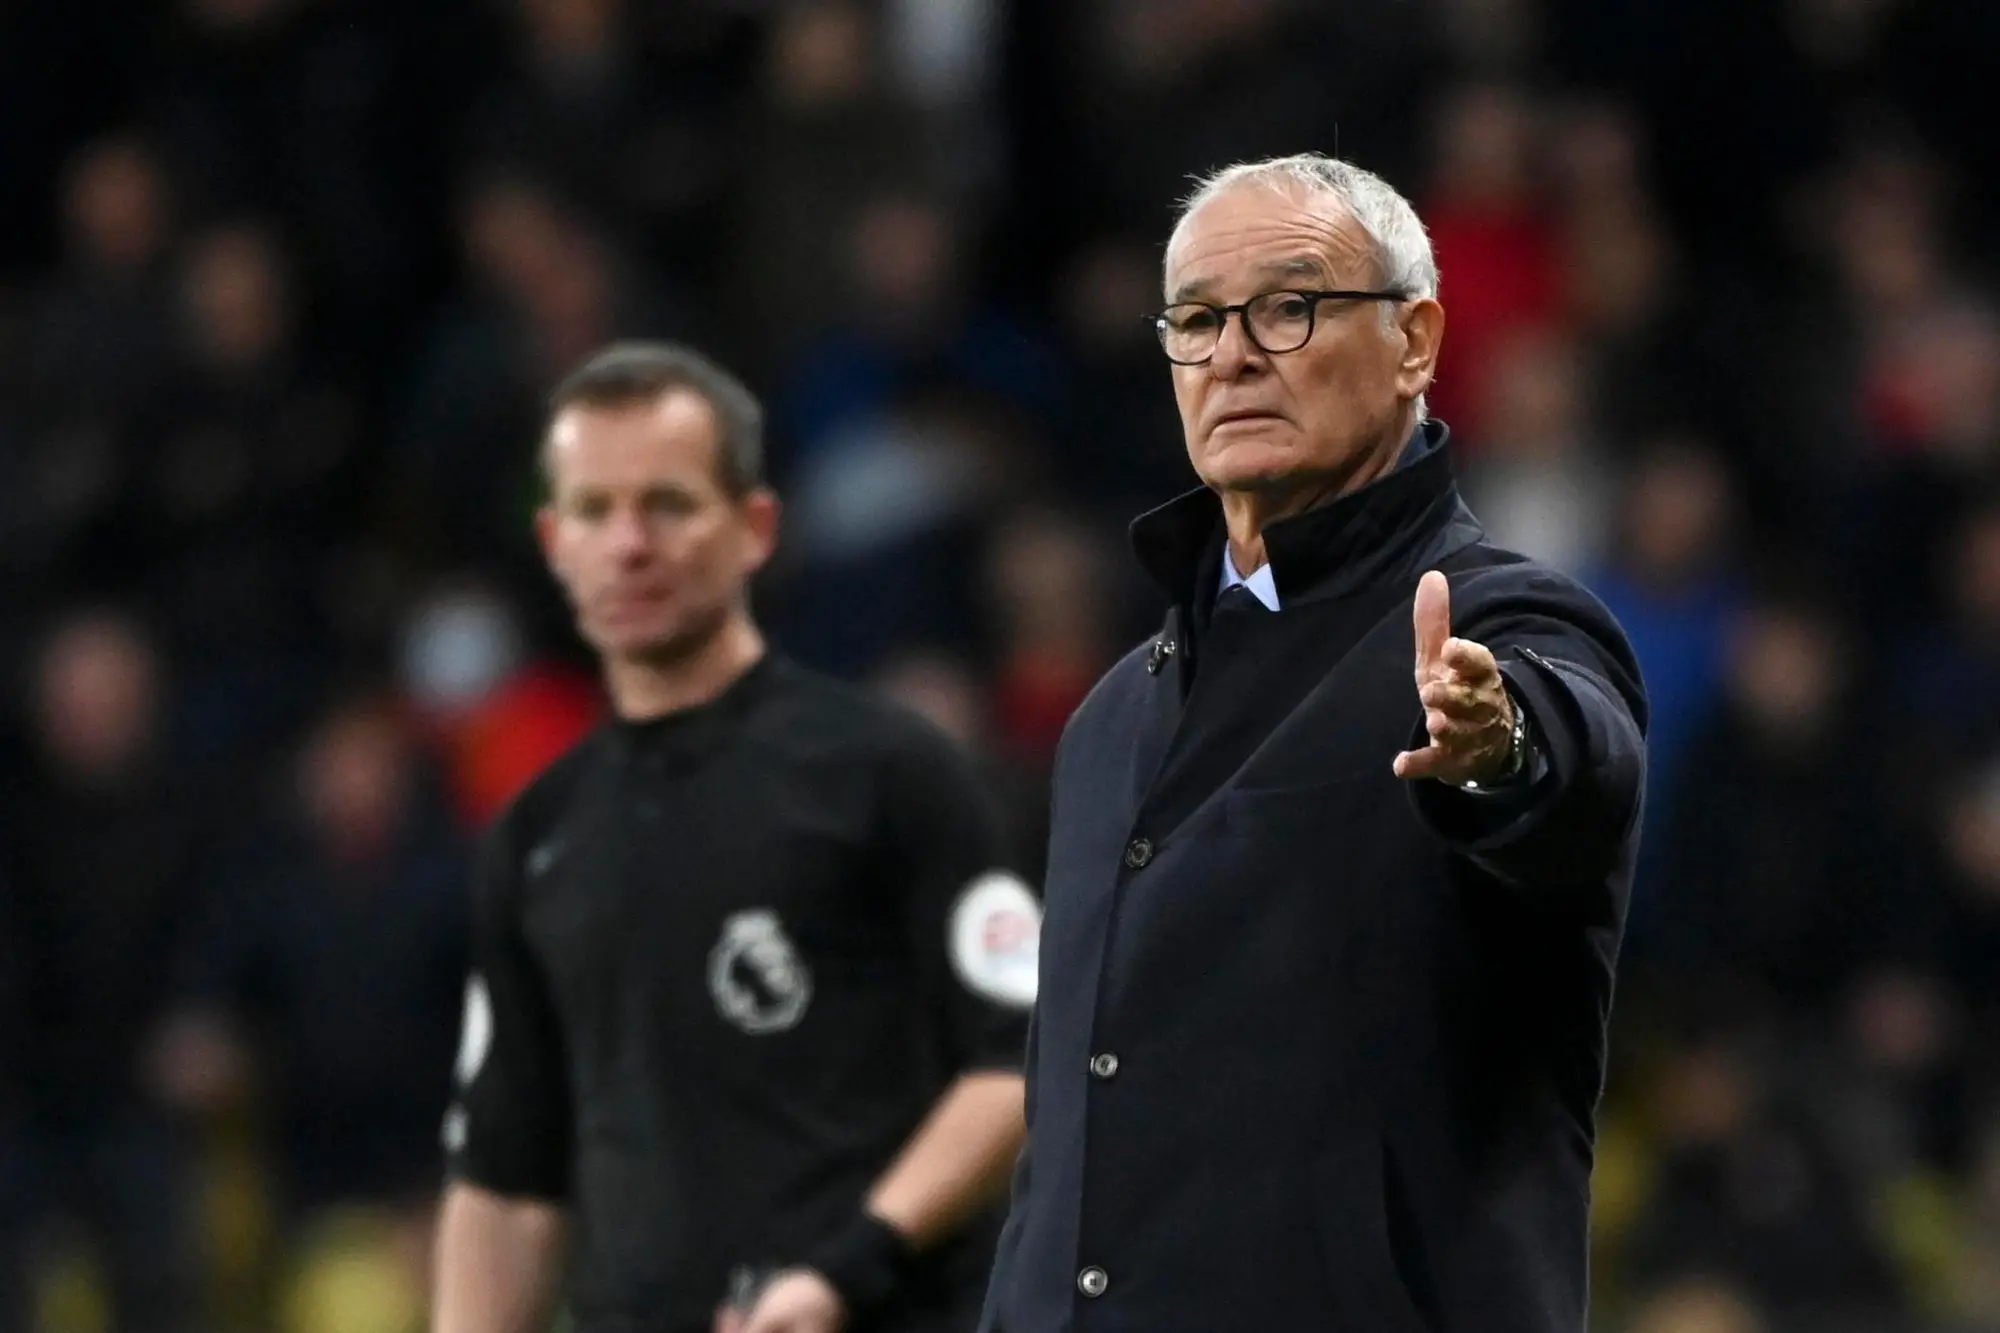 epa09594149 Watford's manager Claudio Ranieri (R) reacts during the English Premier League soccer match between Watford FC and Manchester United in Watford, Britain, 20 November 2021. EPA/VICKIE FLORES EDITORIAL USE ONLY. No use with unauthorized audio, video, data, fixture lists, club/league logos or 'live' services. Online in-match use limited to 120 images, no video emulation. No use in betting, games or single club/league/player publications